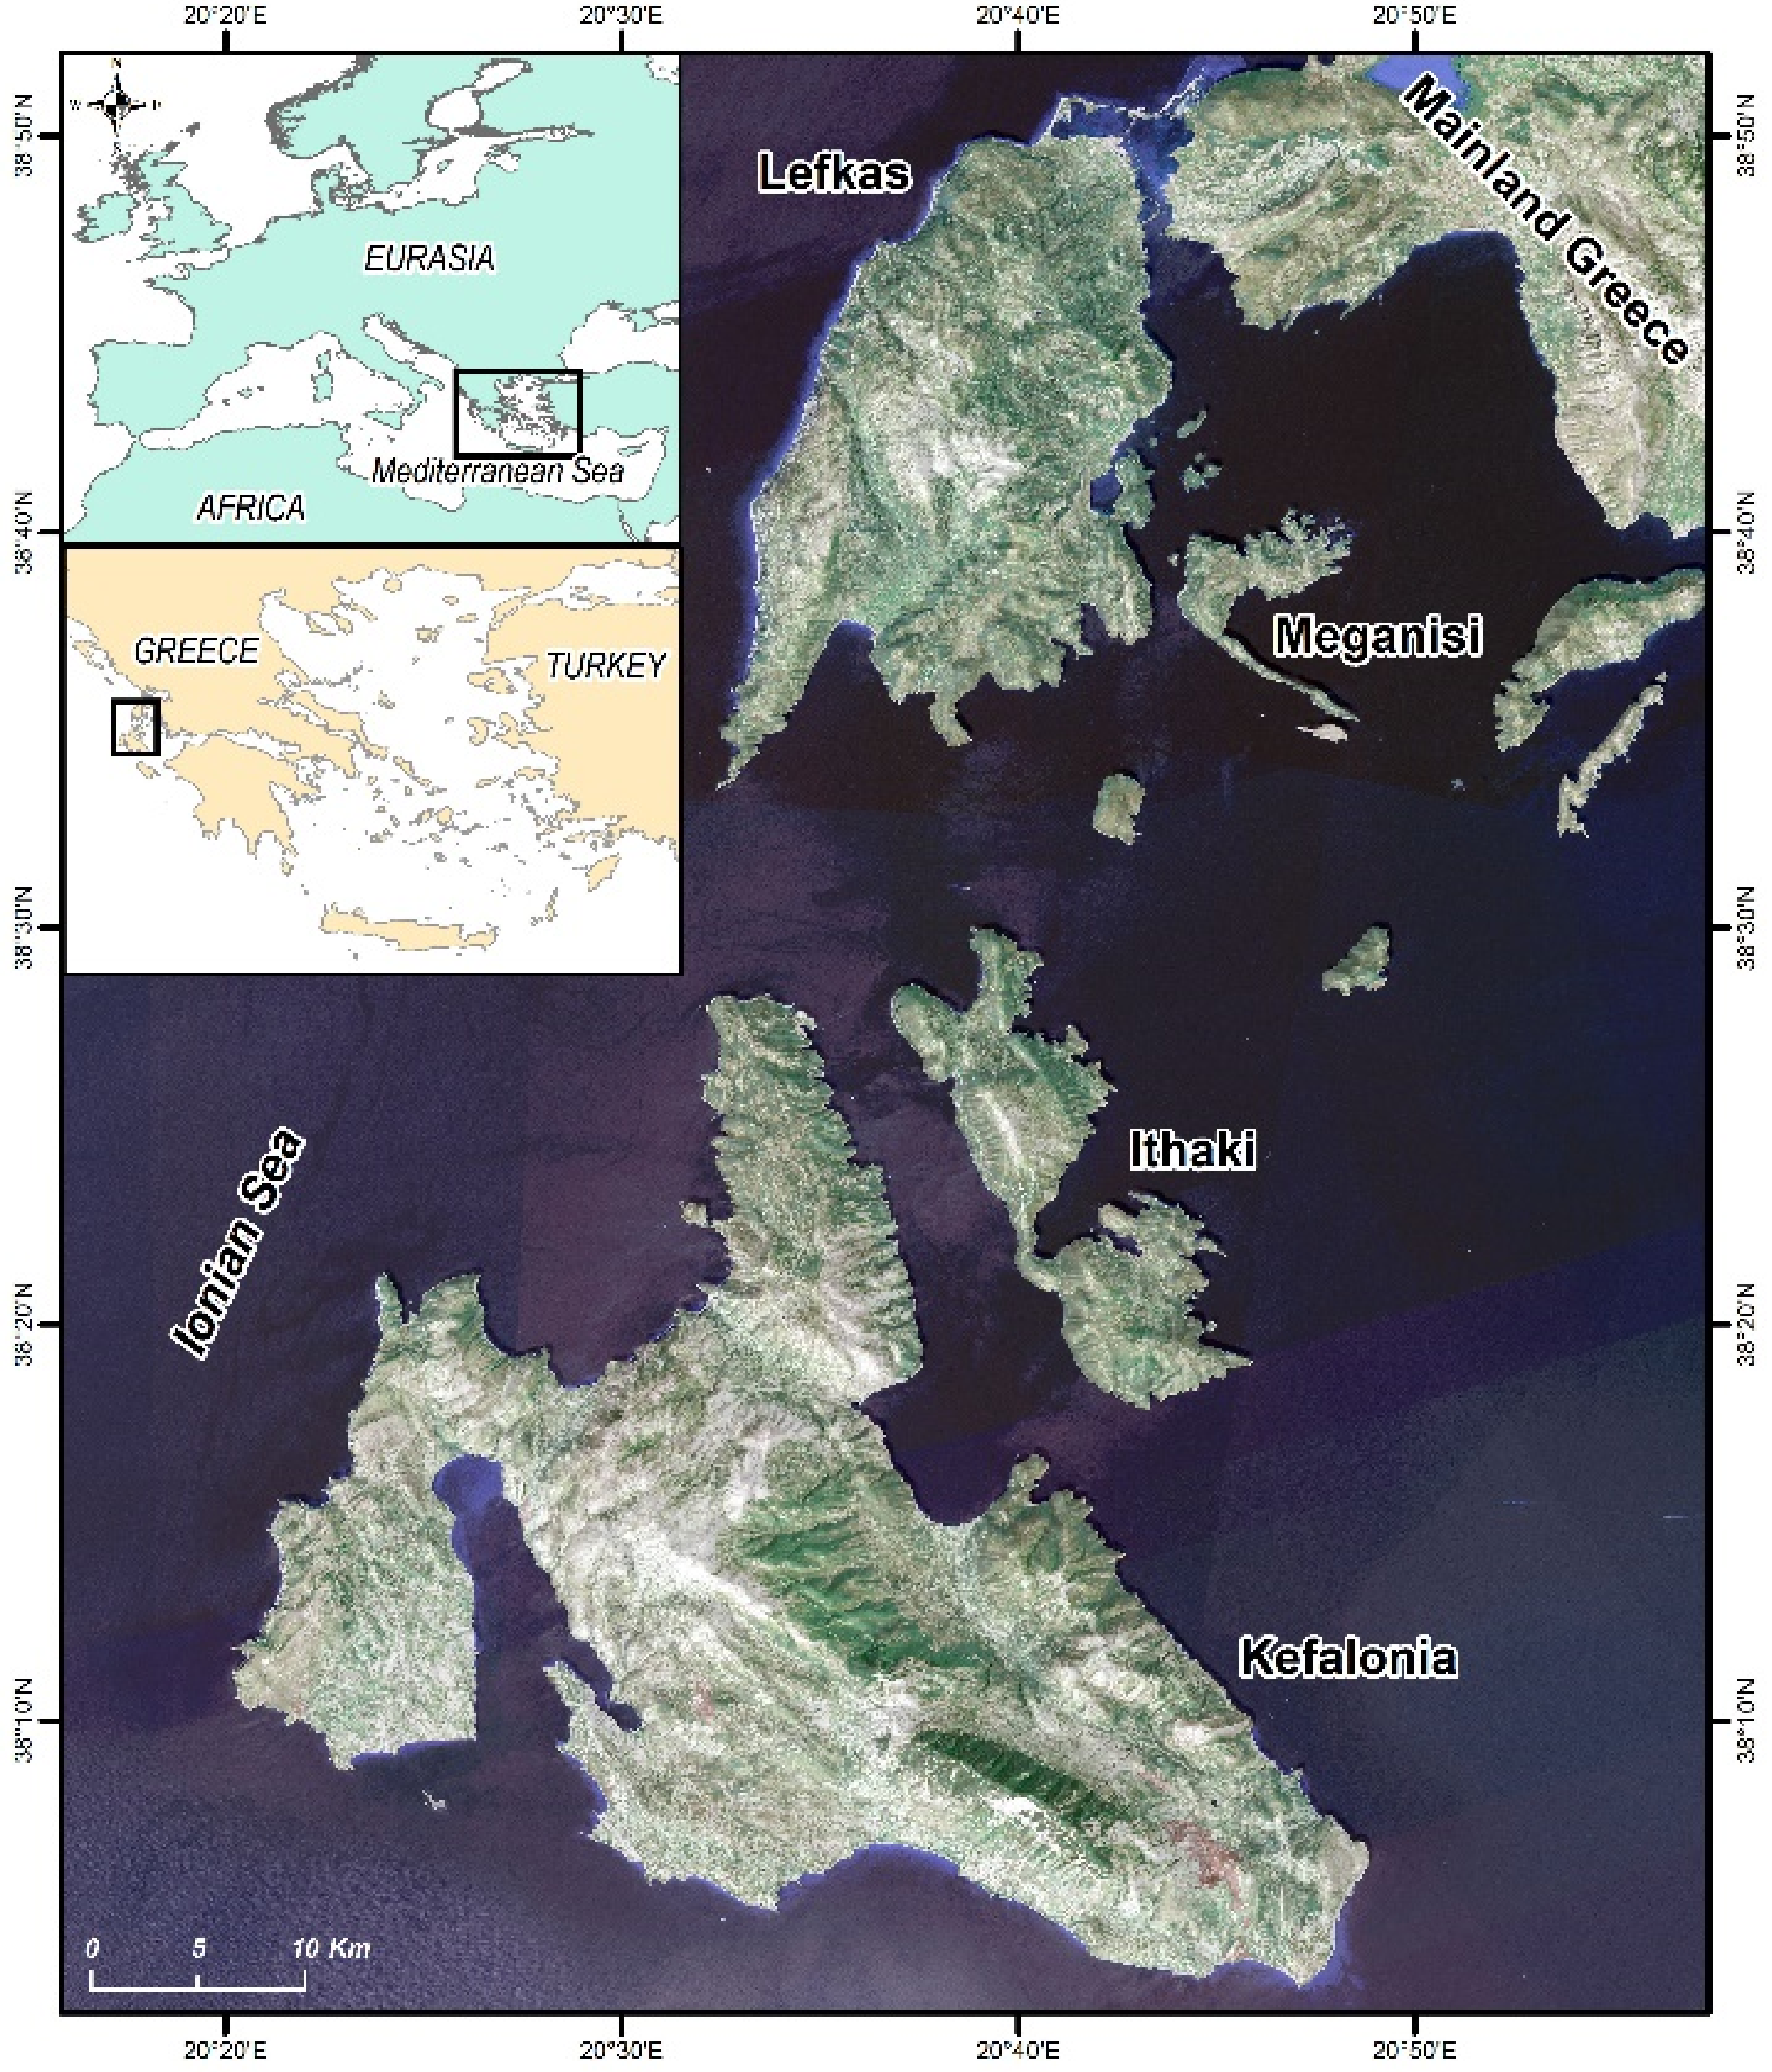 Geosciences | Free Full-Text | Assessment of Geological Heritage Sites and  Their Significance for Geotouristic Exploitation: The Case of Lefkas,  Meganisi, Kefalonia and Ithaki Islands, Ionian Sea, Greece | HTML